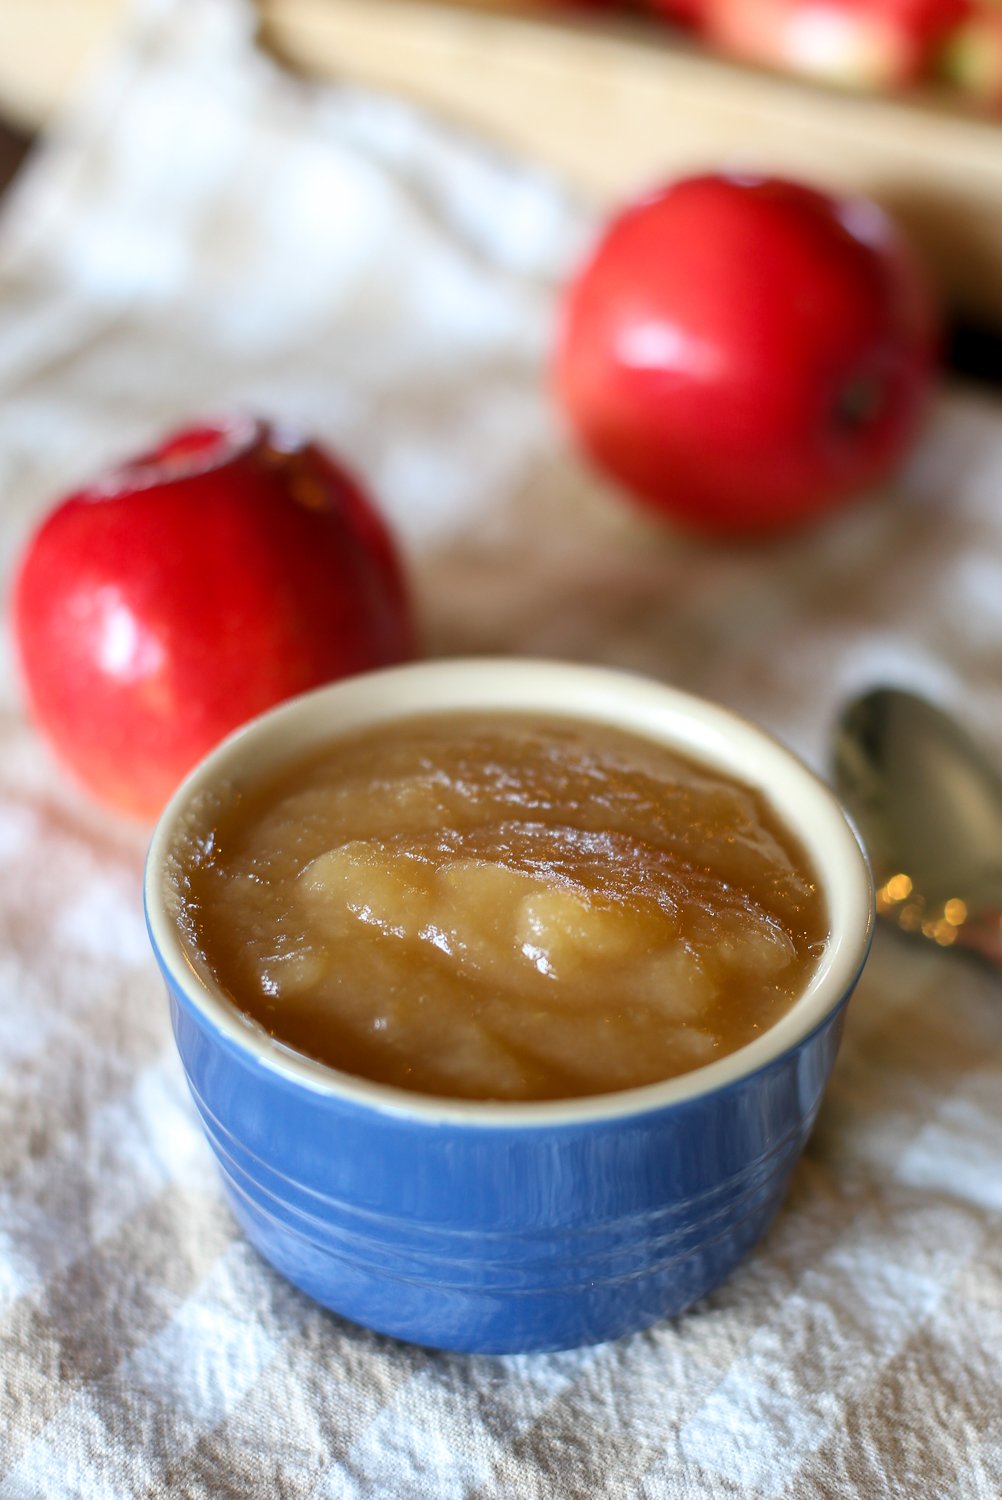 Crockpot cinnamon apple sauce in a small bowl with apples next to it.